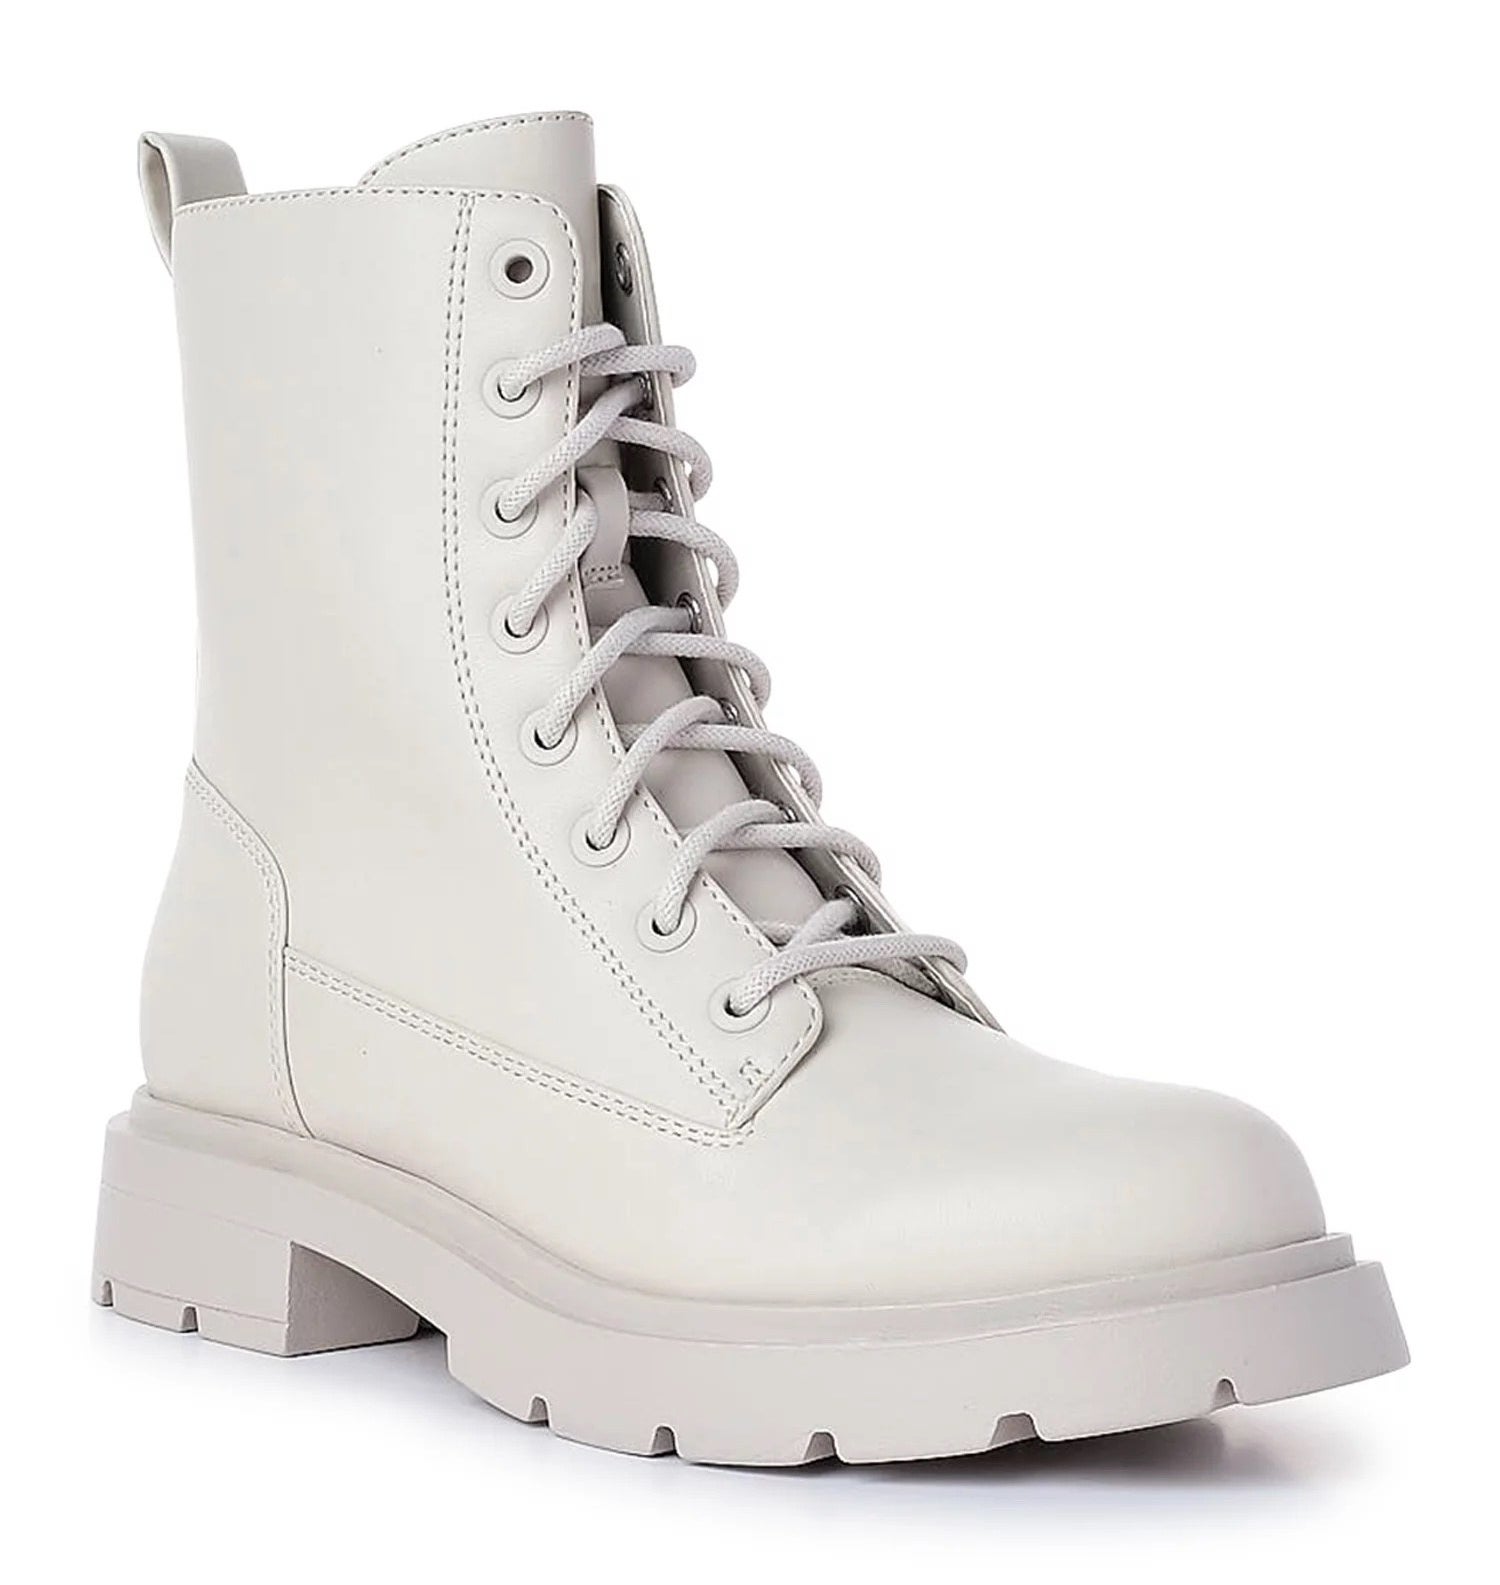 A pair of white combat boots